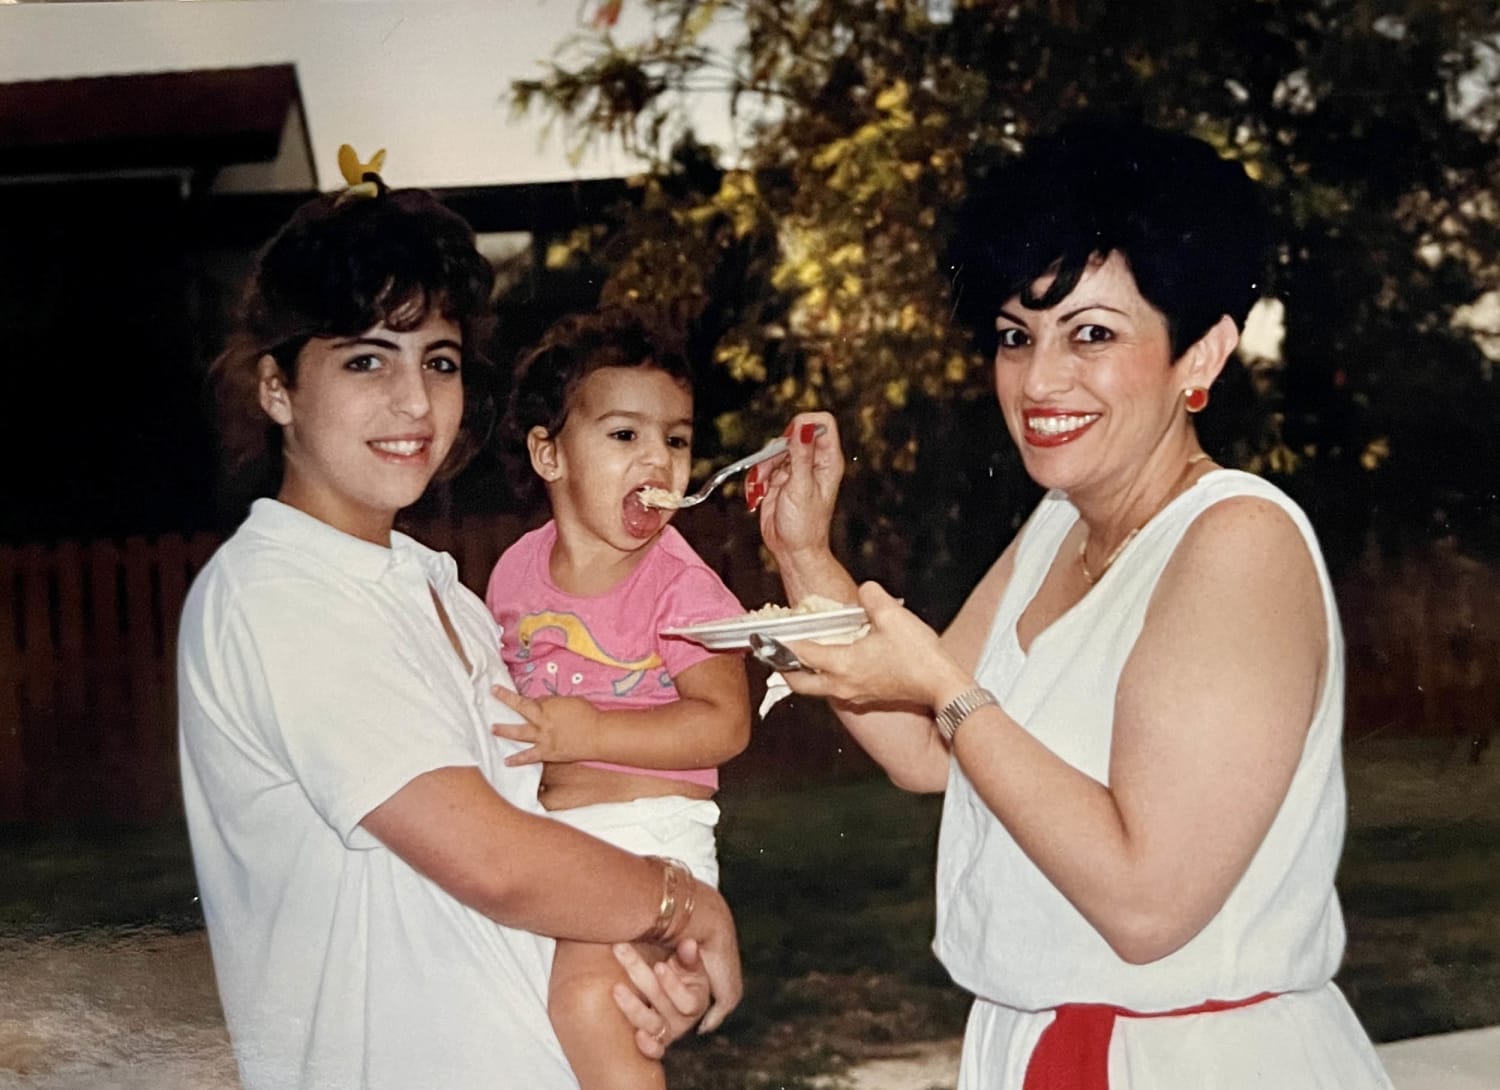 Grandmother knows best: Cuban American women tout their abuelas' cooking and life lessons